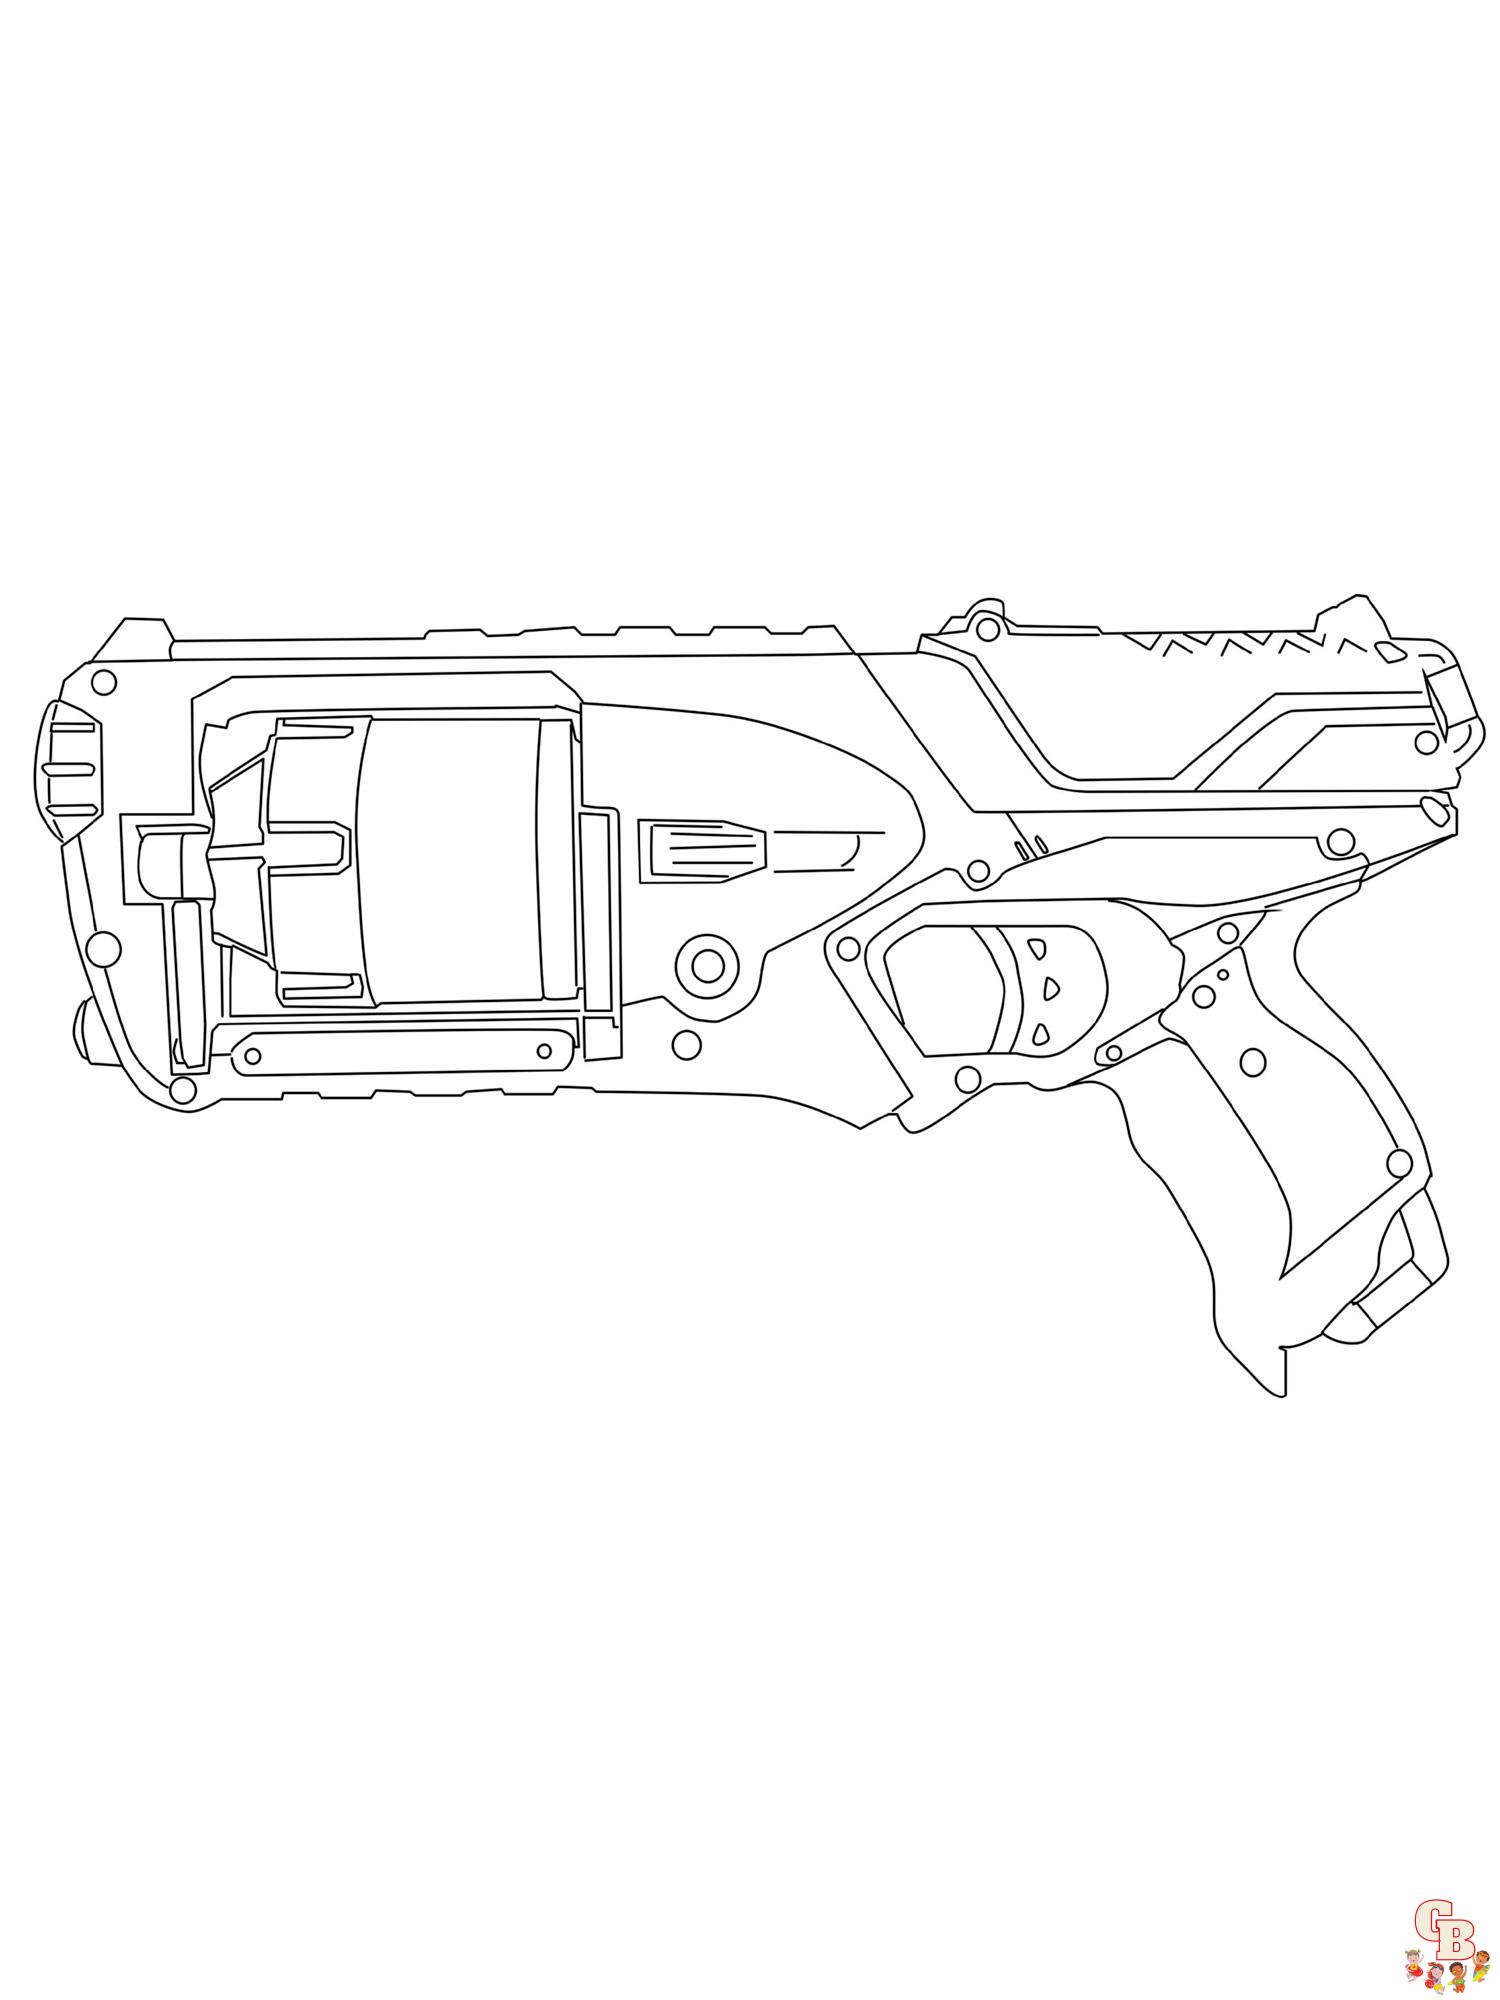 Nerf Gun Coloring Pages 9